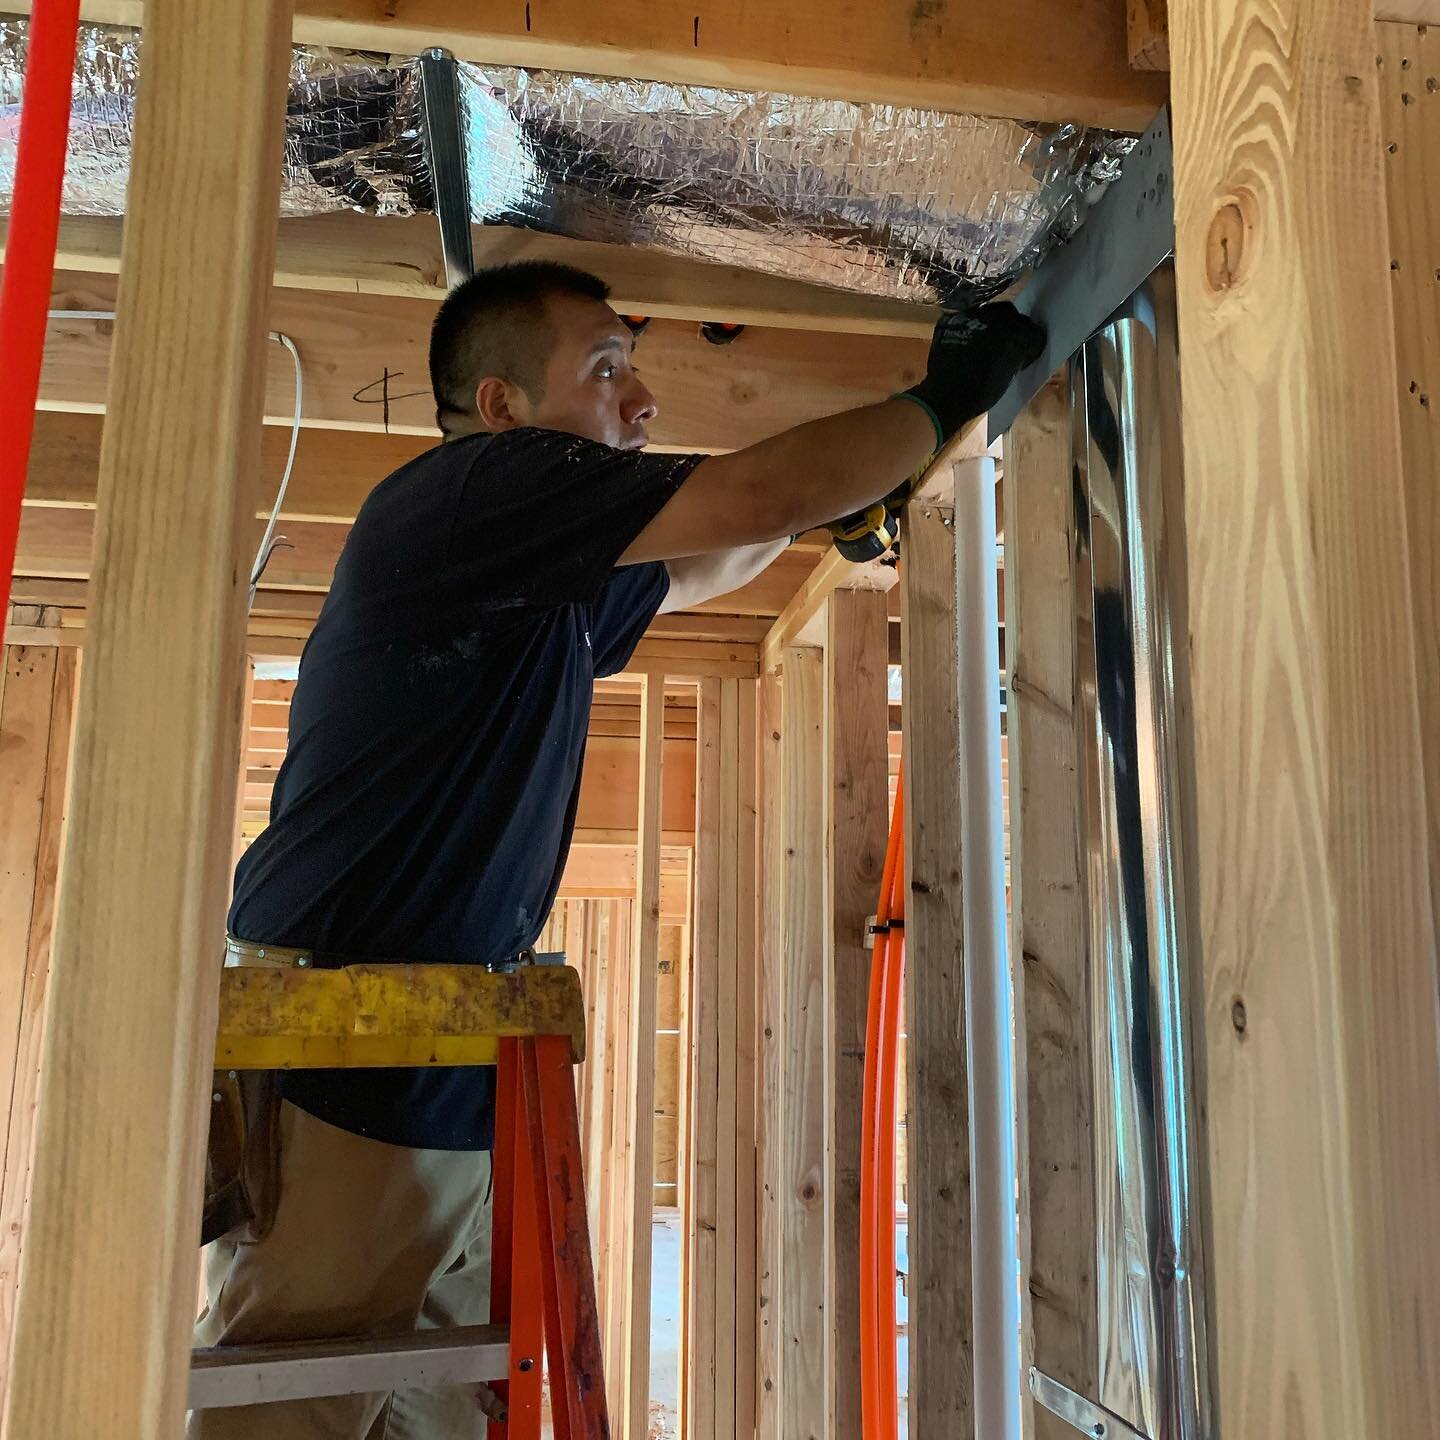 Working out there in the heat #plumberslife #residentialnewconstruction #paramusnj #paramus #avsbuilders #emergencyplumber
#plumbing #plumber #plumbinglife #plumbers #heating #construction #plumberslife #plumbersofinstagram #plumbingservices #plumbin